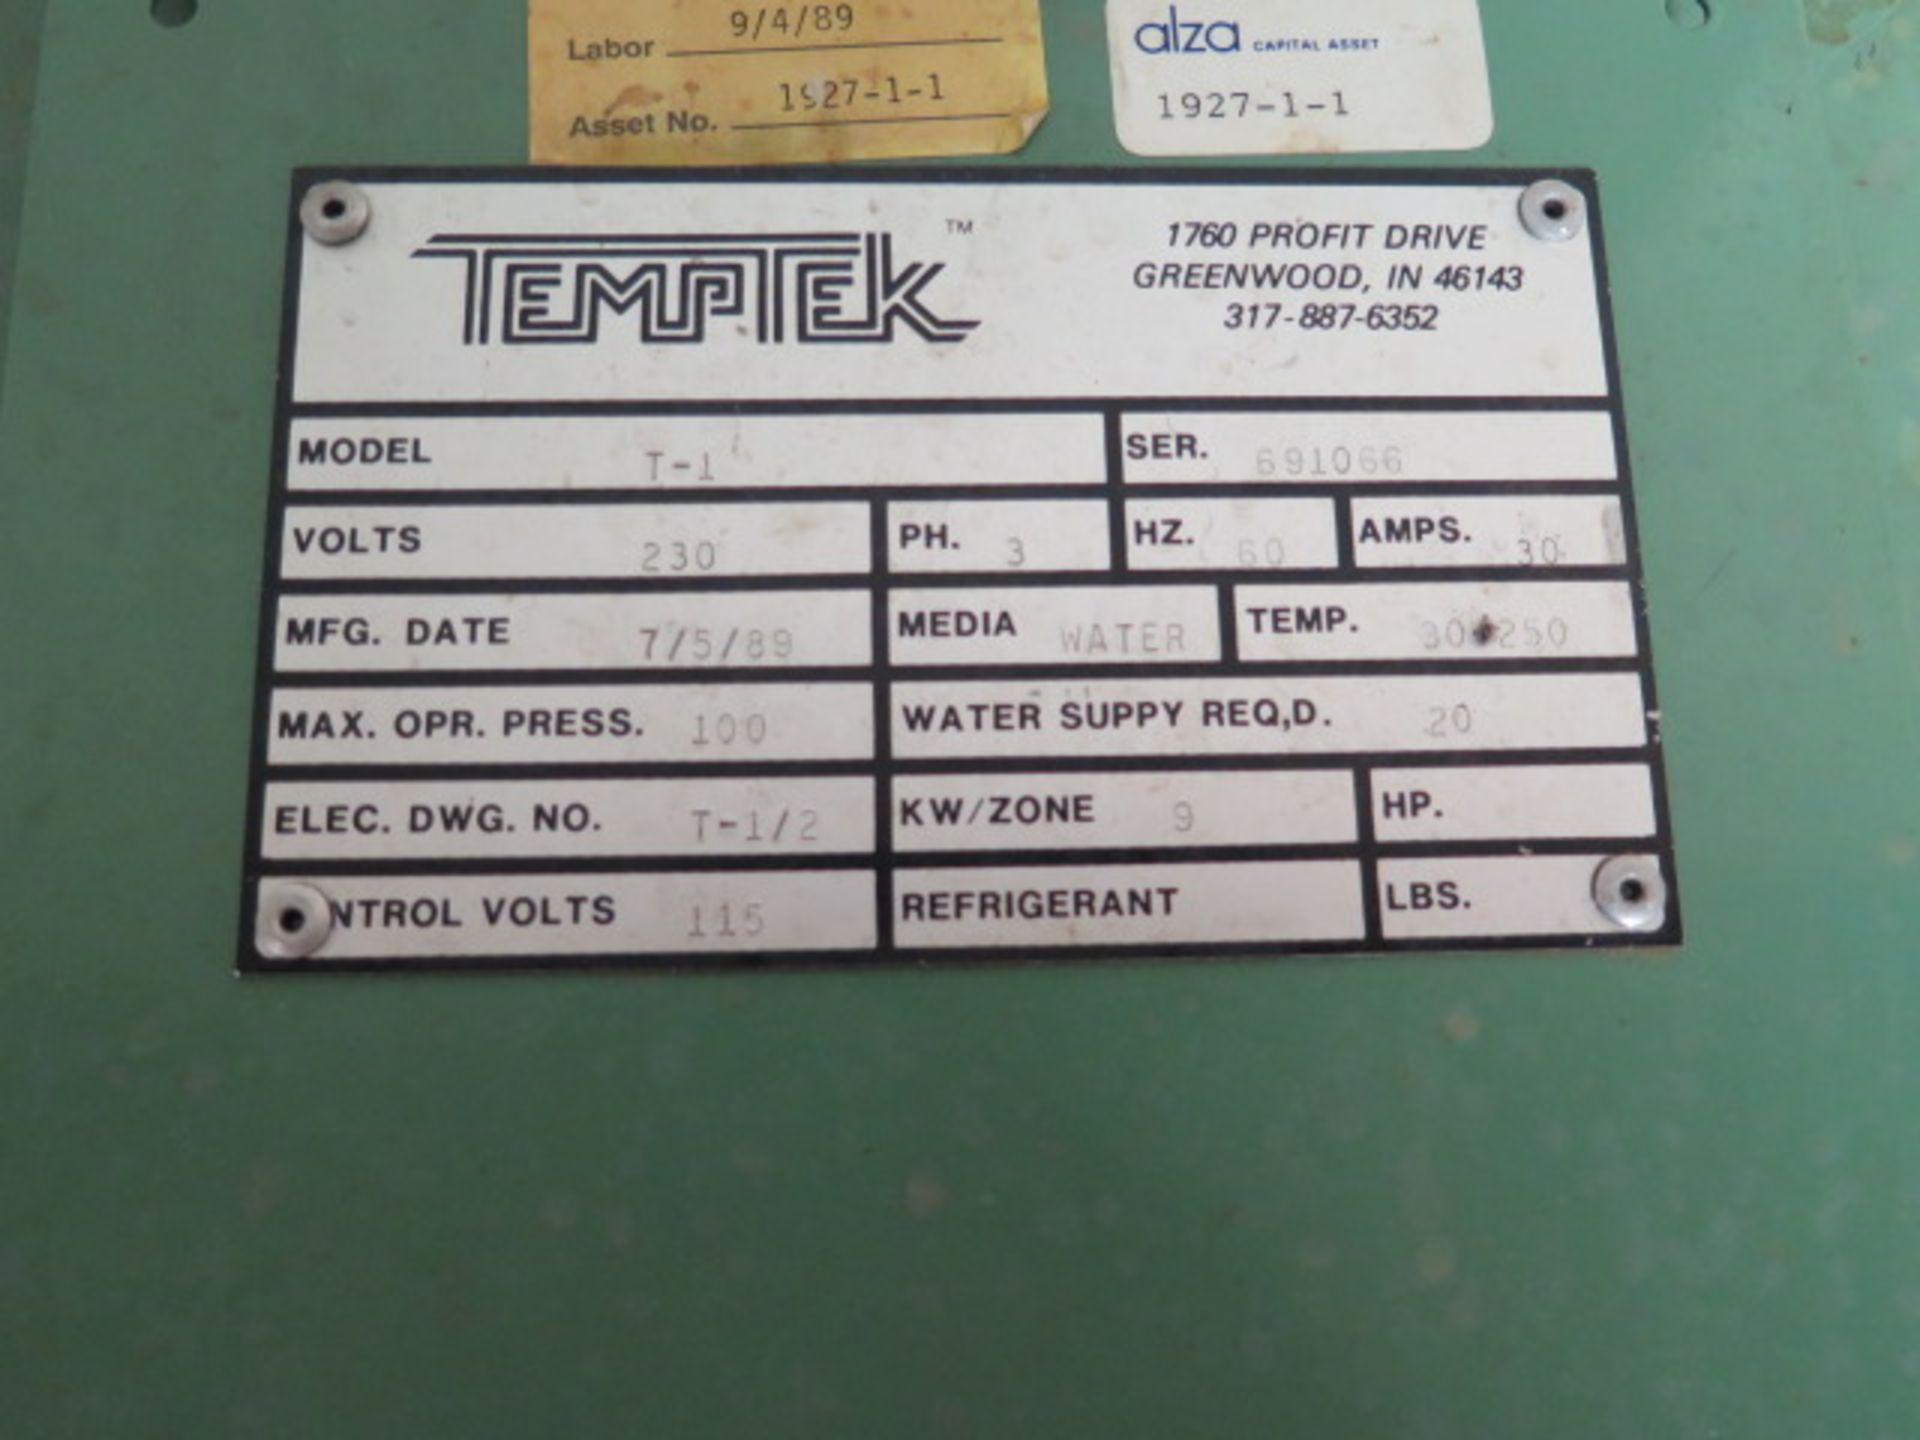 Conair 840-522-01 and (2) Temptek T-1 Temperature Controllers (3 - NEED WORK) (SOLD AS-IS - NO WARRA - Image 11 of 11